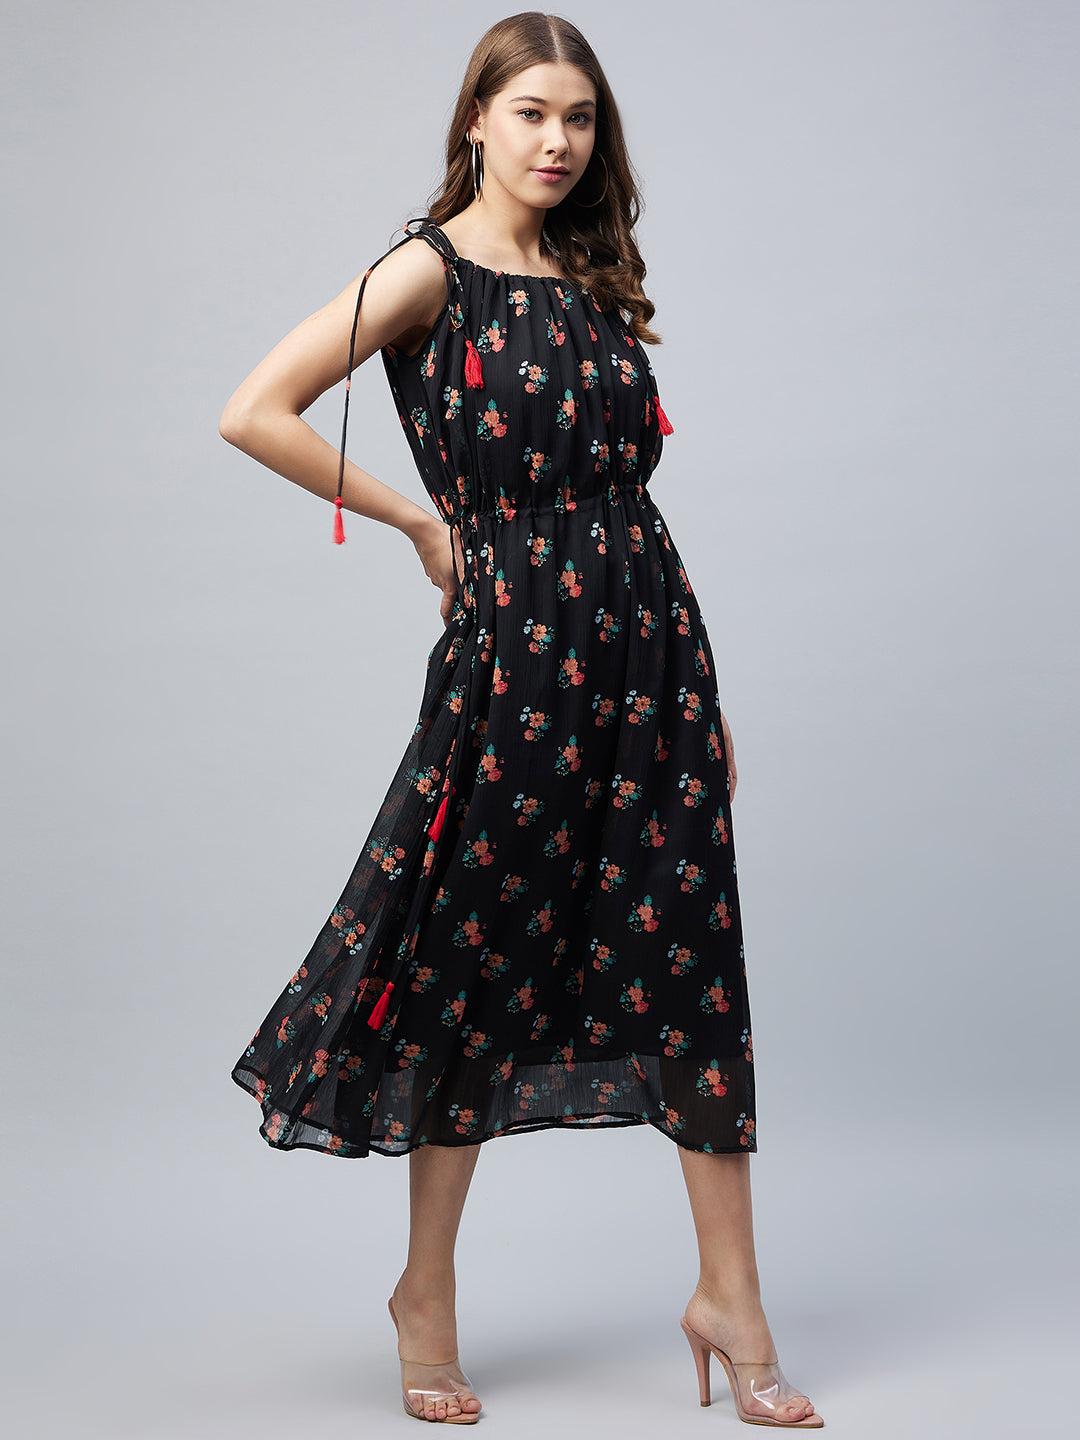 Women's Black Floral Tie up Dress with Tassels